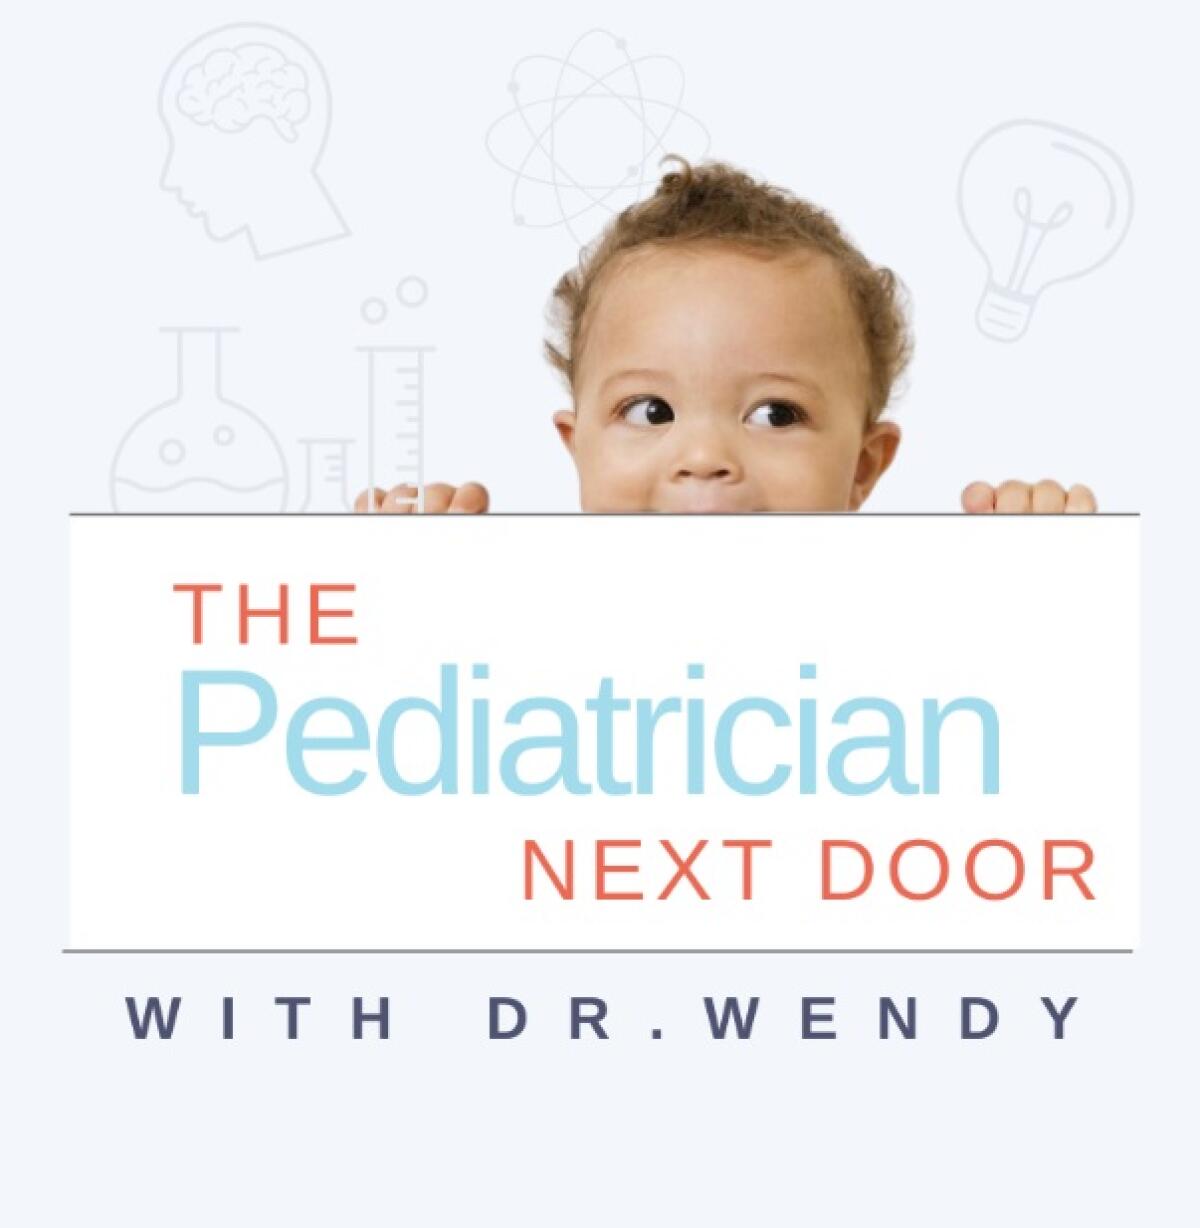 "The Pediatrician Next Door," hosted by La Jolla pediatrician Dr. Wendy Hunter, is free, with new episodes on Wednesdays.